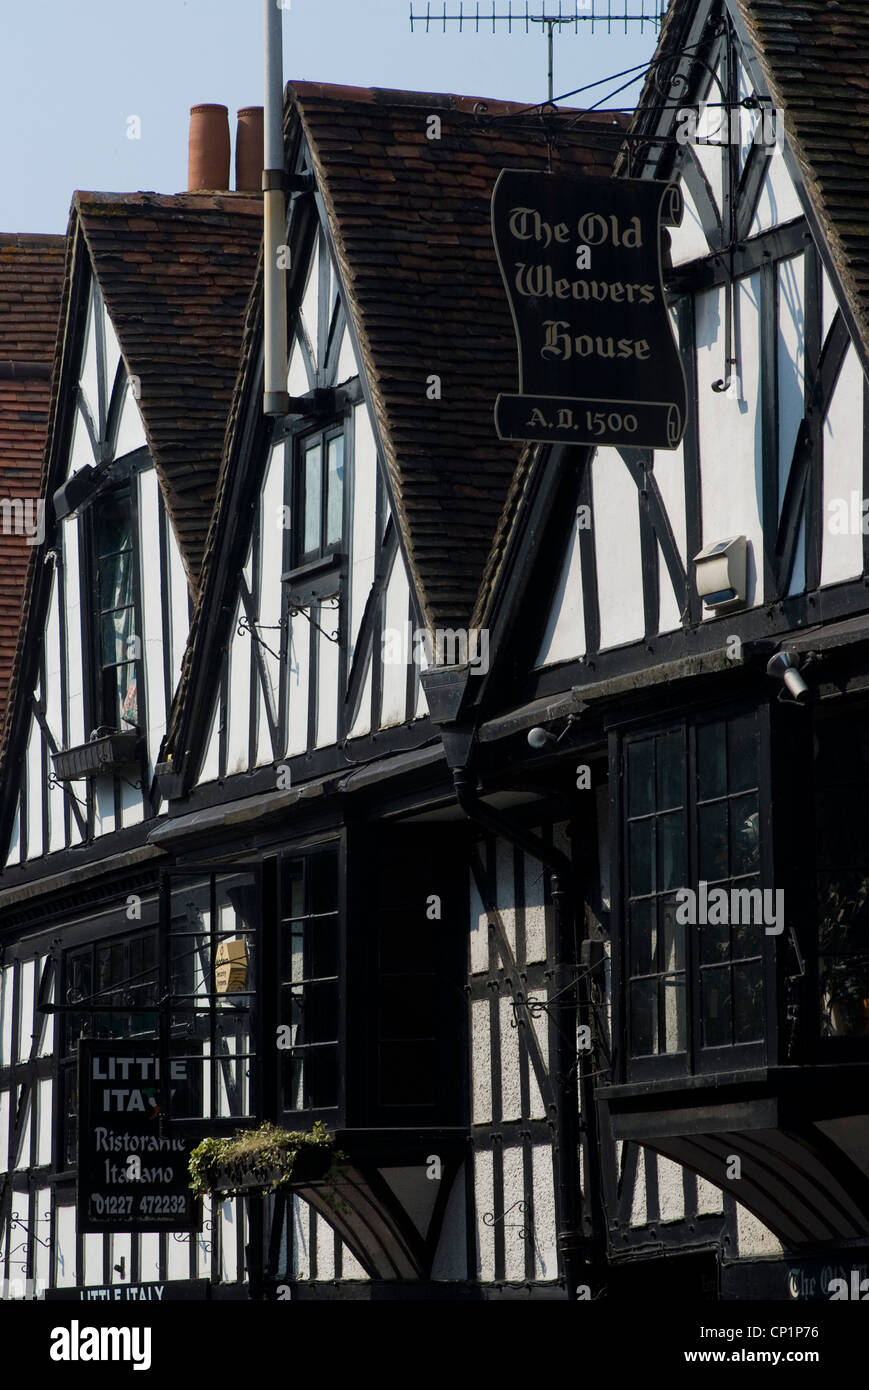 The Old Weaver's House, St Peter Street, Canterbury, Kent, England Stock Photo